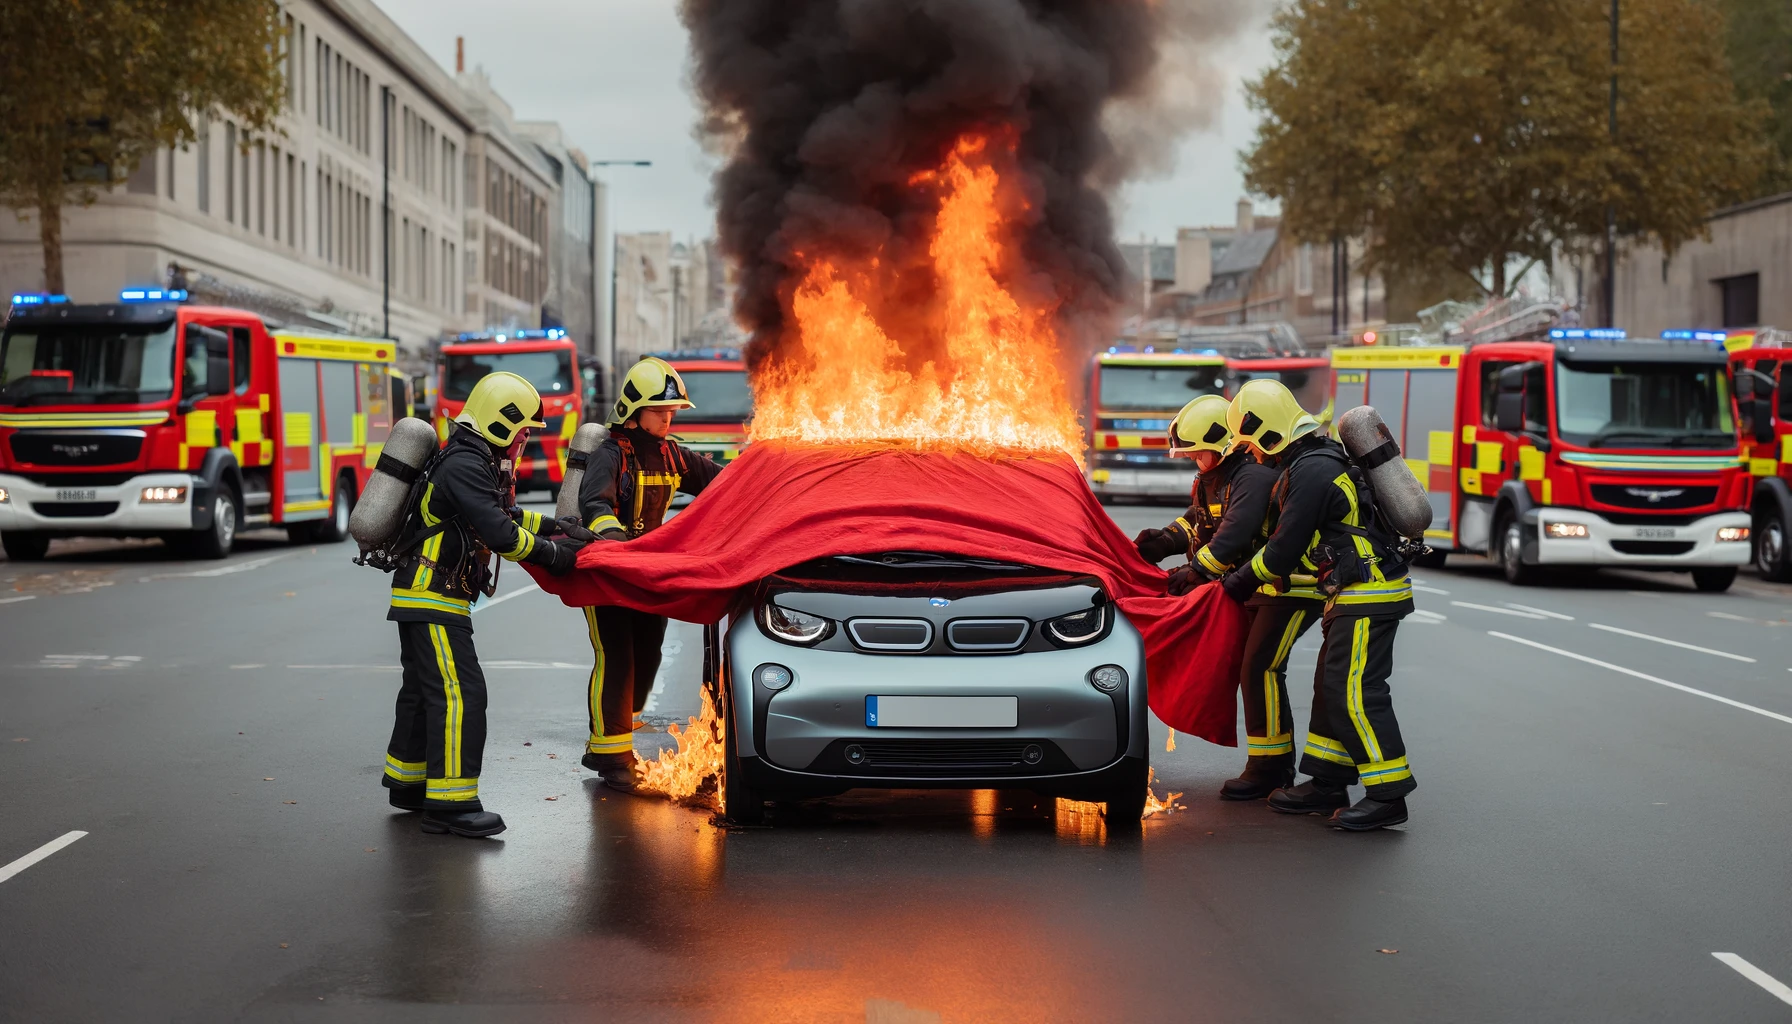 Firefighters draping a fire blanket over a burning electric vehicle (EV). The scene captures a team of firefighters, in full gear with helmets, carefu